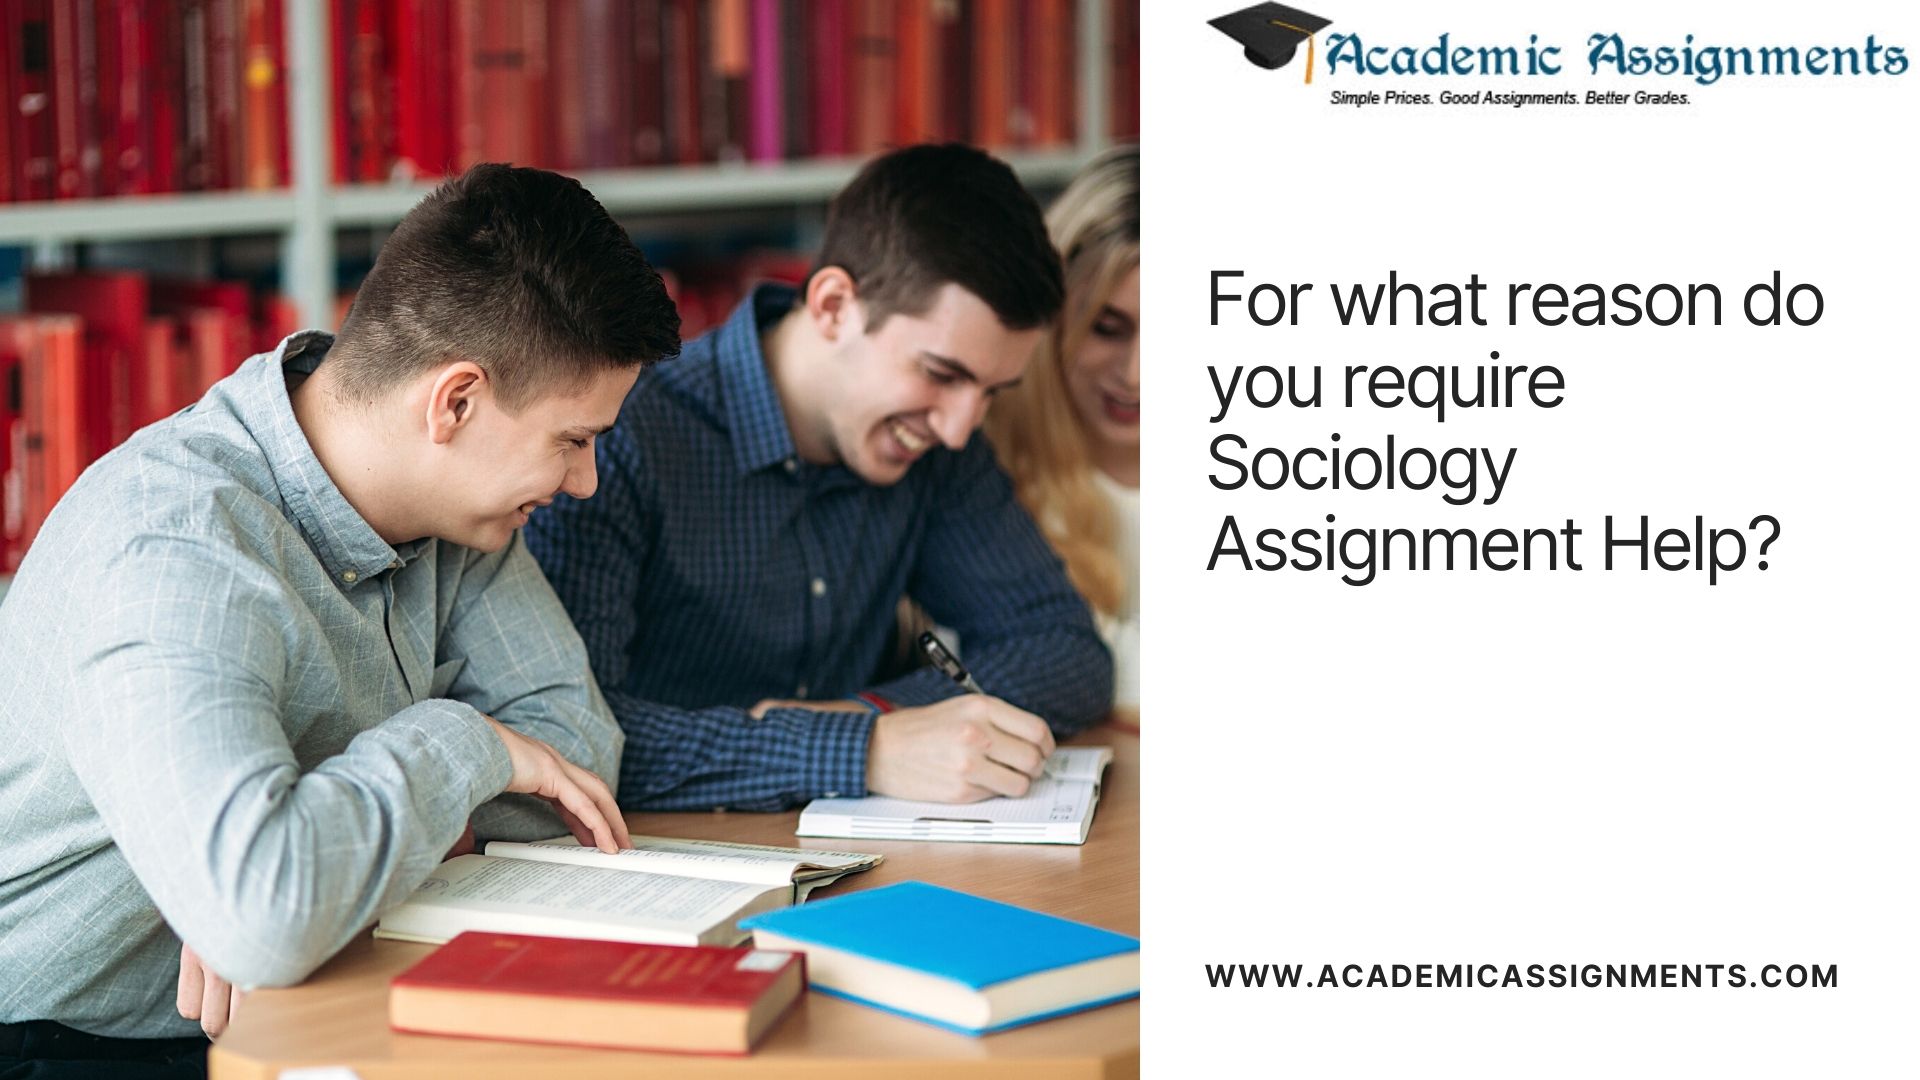 For what reason do you require Sociology Assignment Help